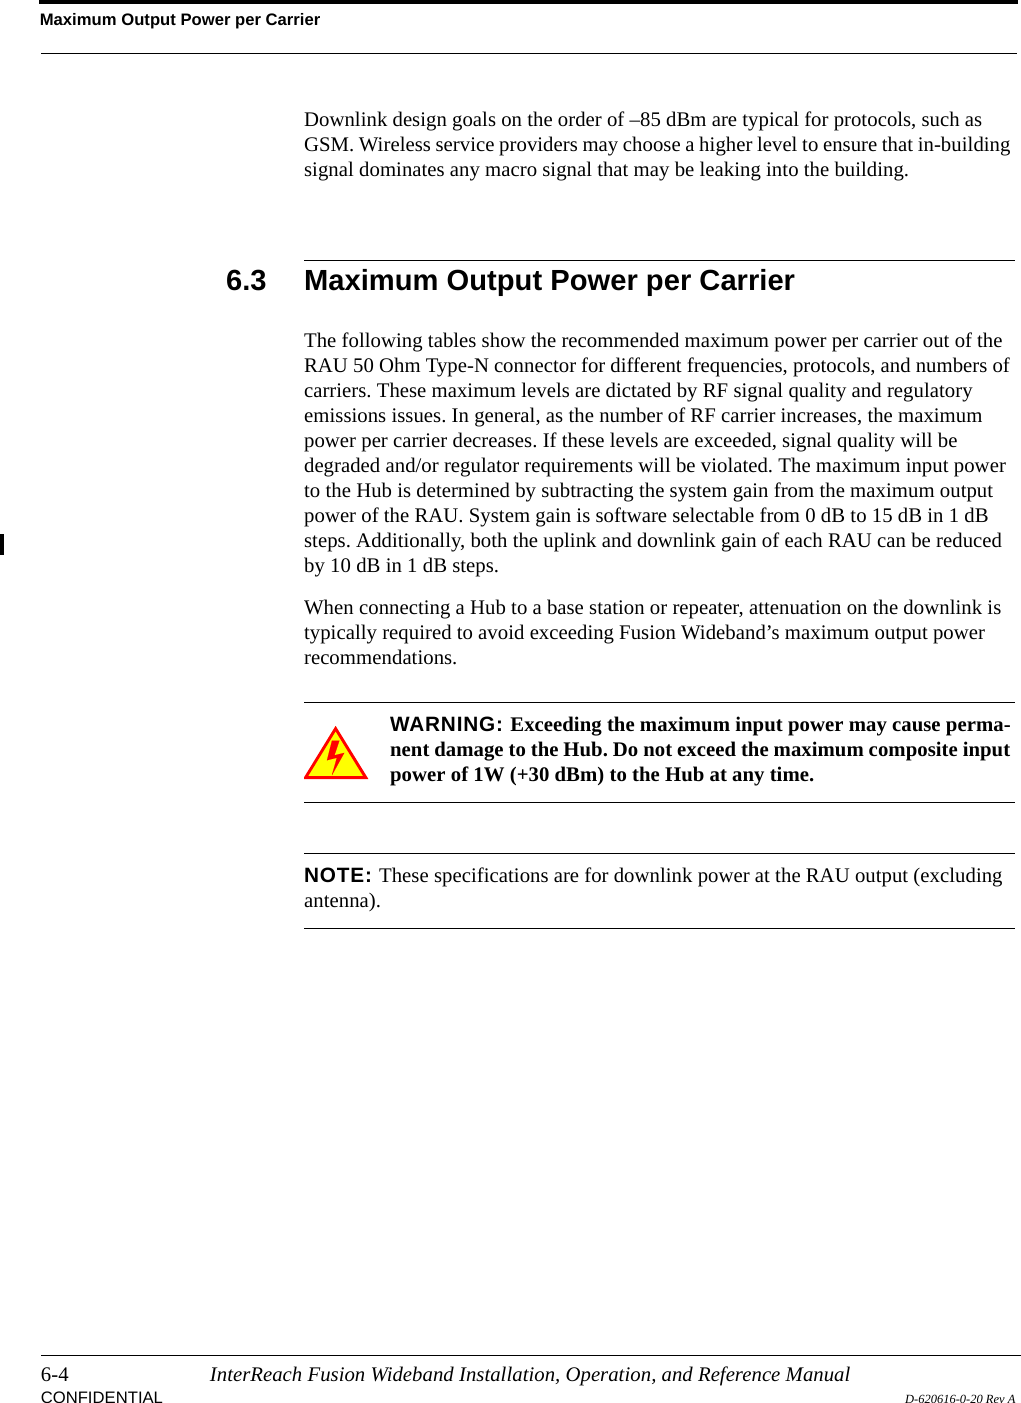 Maximum Output Power per Carrier6-4 InterReach Fusion Wideband Installation, Operation, and Reference ManualCONFIDENTIAL D-620616-0-20 Rev ADownlink design goals on the order of –85 dBm are typical for protocols, such as GSM. Wireless service providers may choose a higher level to ensure that in-building signal dominates any macro signal that may be leaking into the building.6.3 Maximum Output Power per CarrierThe following tables show the recommended maximum power per carrier out of the RAU 50 Ohm Type-N connector for different frequencies, protocols, and numbers of carriers. These maximum levels are dictated by RF signal quality and regulatory emissions issues. In general, as the number of RF carrier increases, the maximum power per carrier decreases. If these levels are exceeded, signal quality will be degraded and/or regulator requirements will be violated. The maximum input power to the Hub is determined by subtracting the system gain from the maximum output power of the RAU. System gain is software selectable from 0 dB to 15 dB in 1 dB steps. Additionally, both the uplink and downlink gain of each RAU can be reduced by 10 dB in 1 dB steps.When connecting a Hub to a base station or repeater, attenuation on the downlink is typically required to avoid exceeding Fusion Wideband’s maximum output power recommendations.WARNING: Exceeding the maximum input power may cause perma-nent damage to the Hub. Do not exceed the maximum composite input power of 1W (+30 dBm) to the Hub at any time.NOTE: These specifications are for downlink power at the RAU output (excluding antenna).